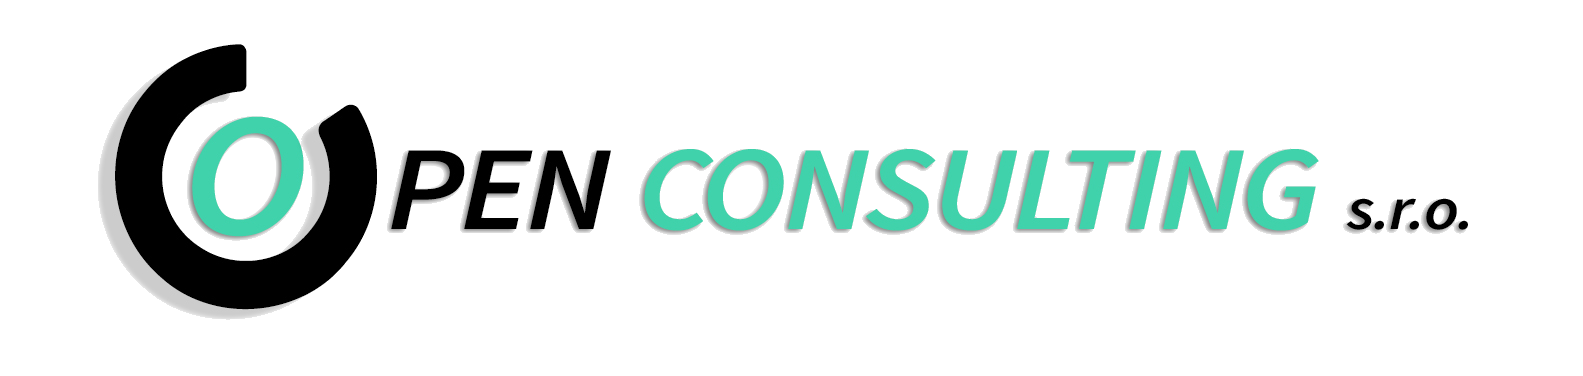 Open Consulting